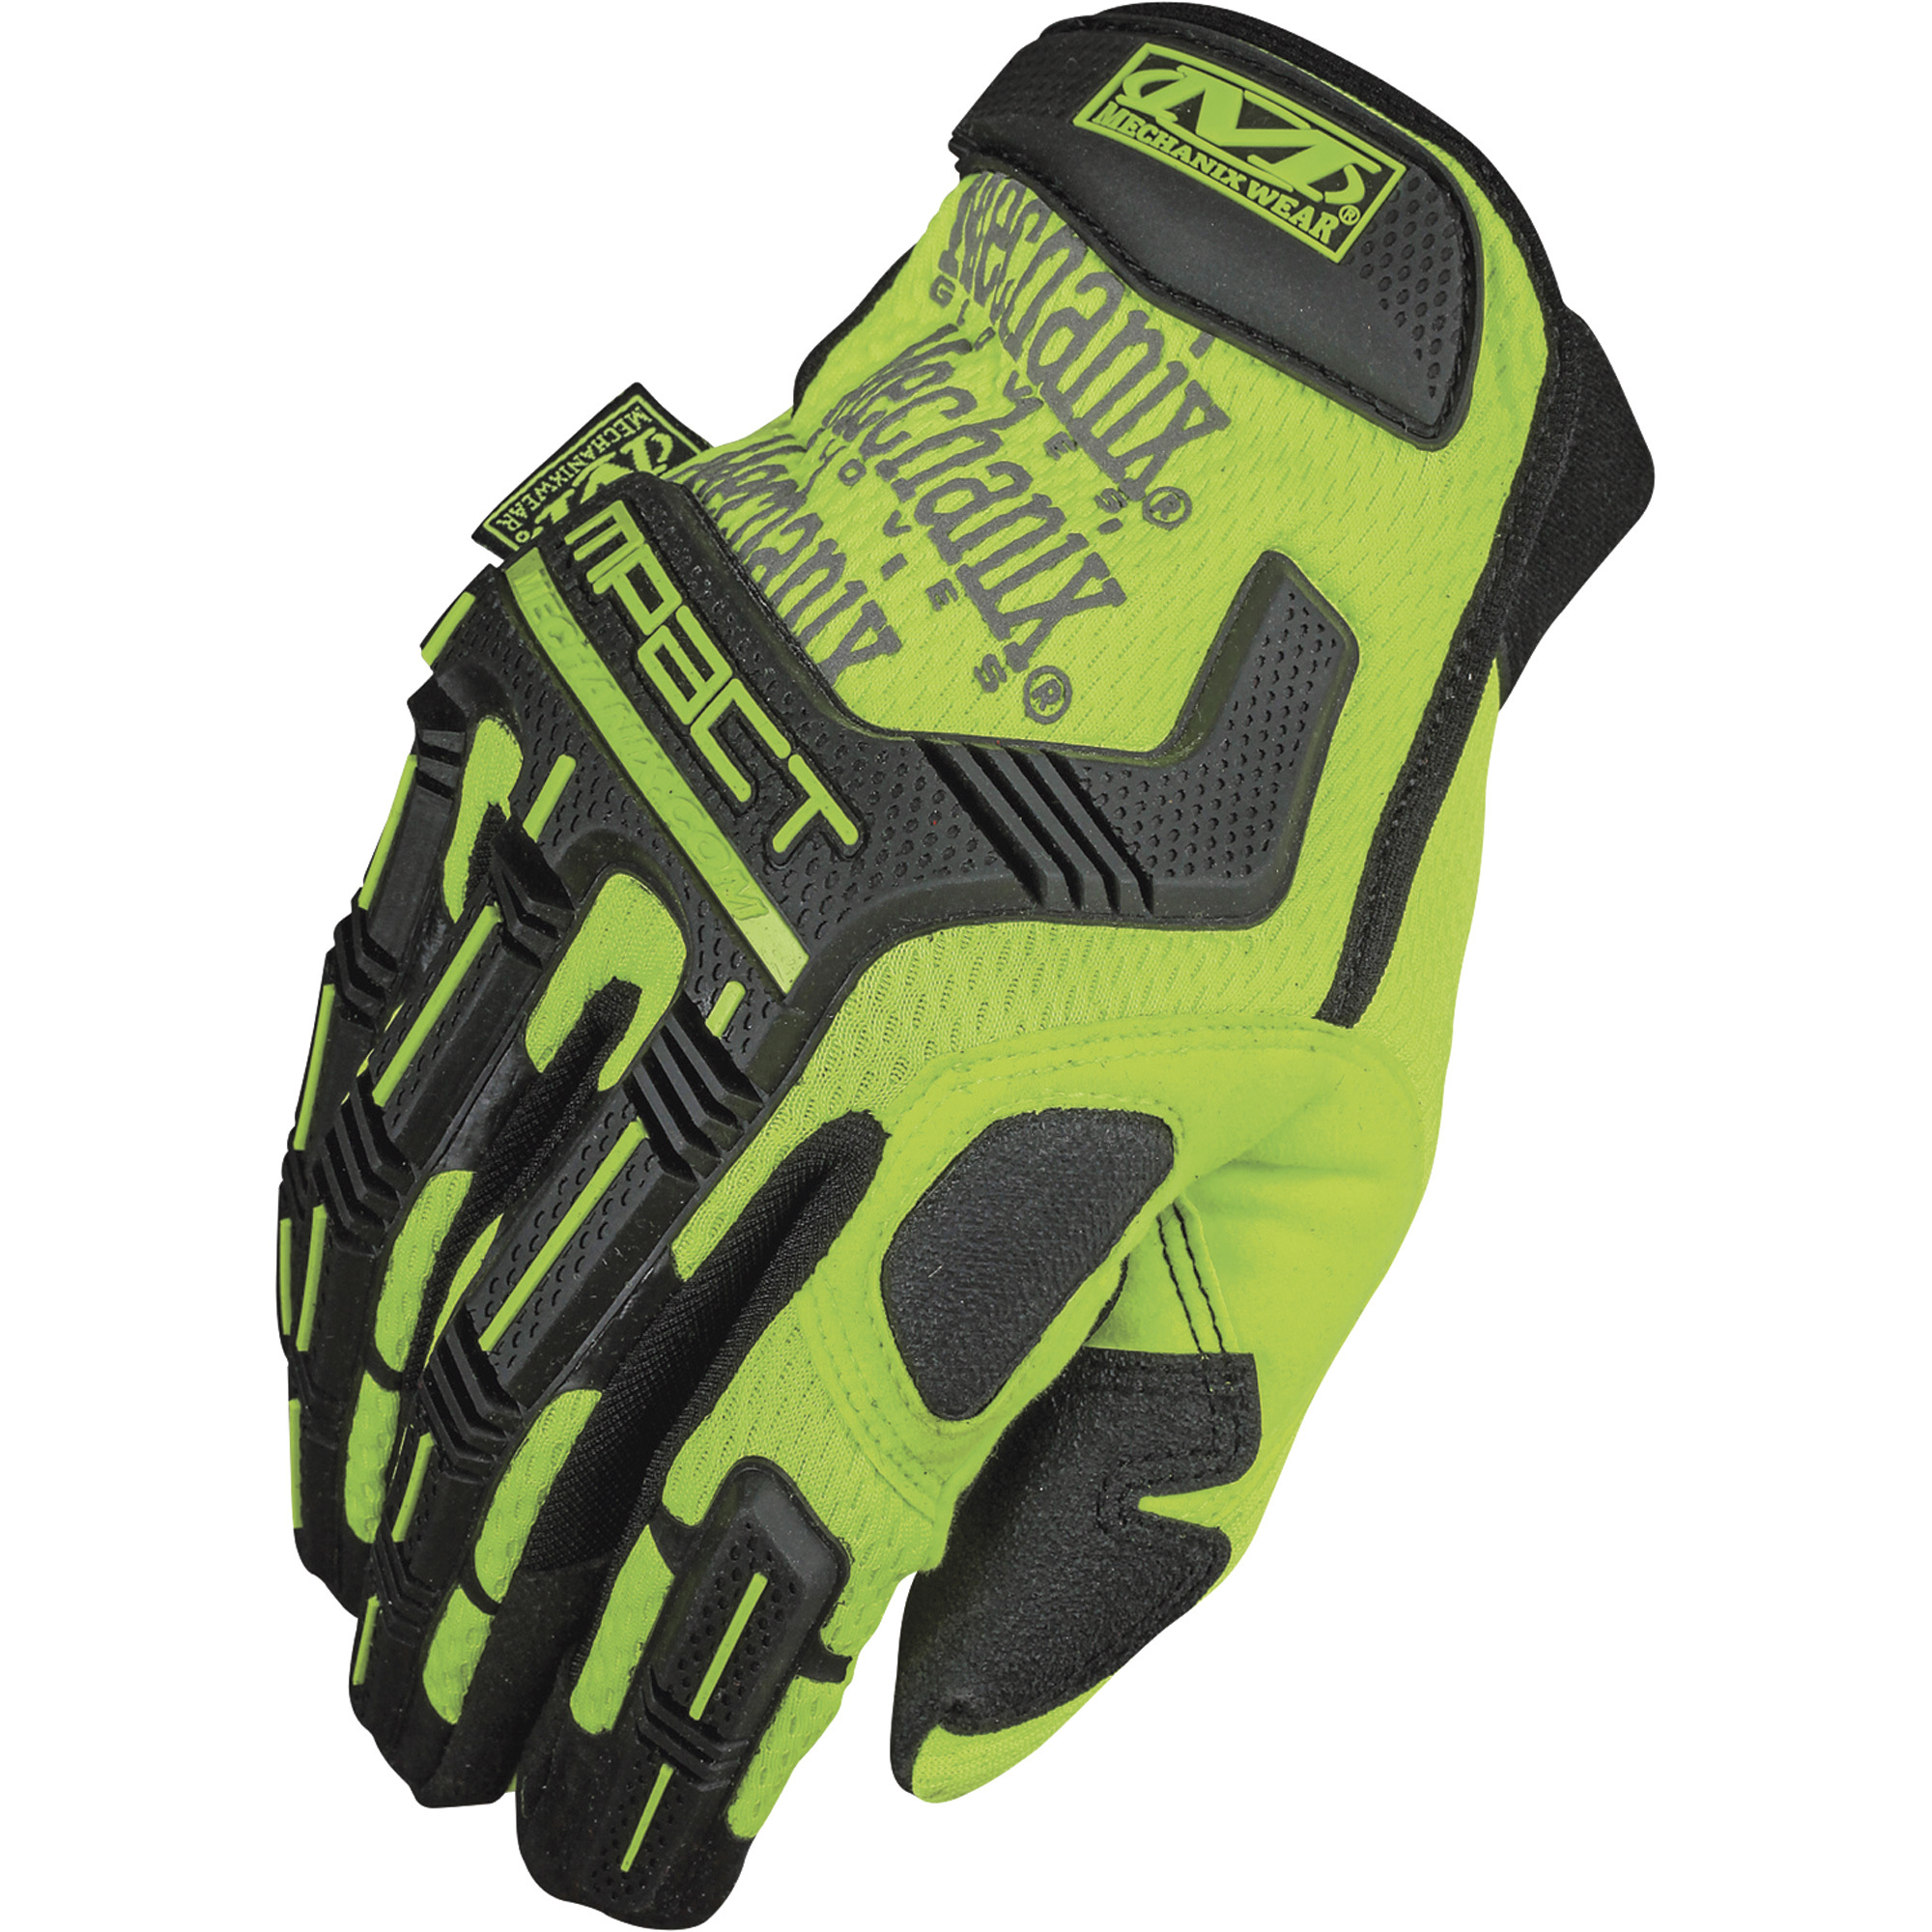 Mechanix Men's Wear Safety M-Pact Gloves - High-Visibility Yellow, Large, Model SMP-91-010